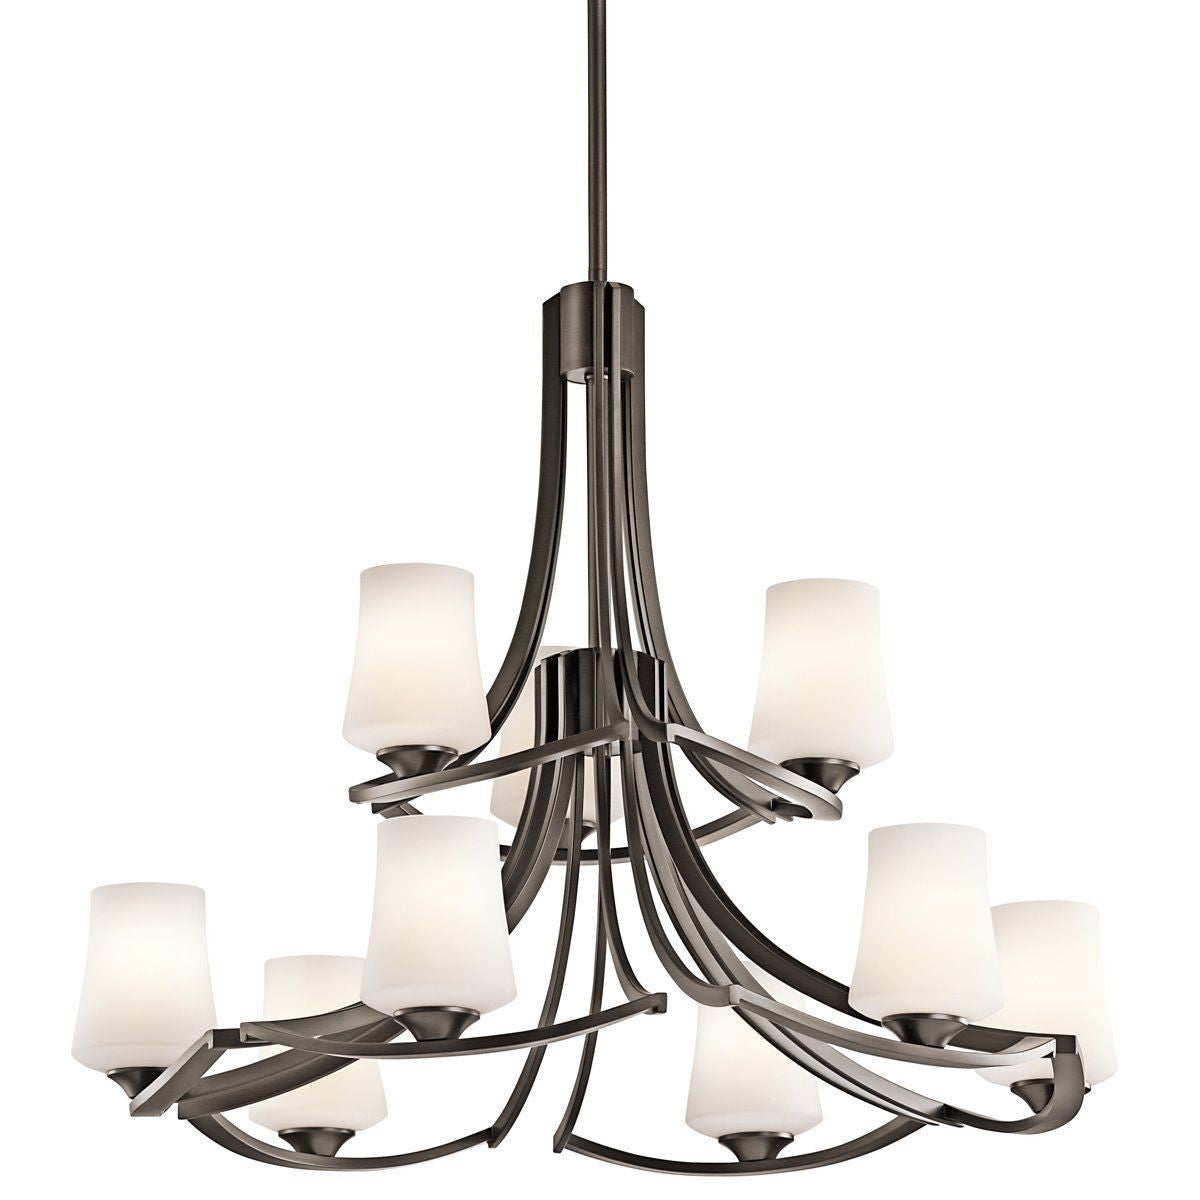 Aztec 34669 by Kichler Lighting Holton Collection Nine Light Hanging Chandelier in Old Bronze Finish